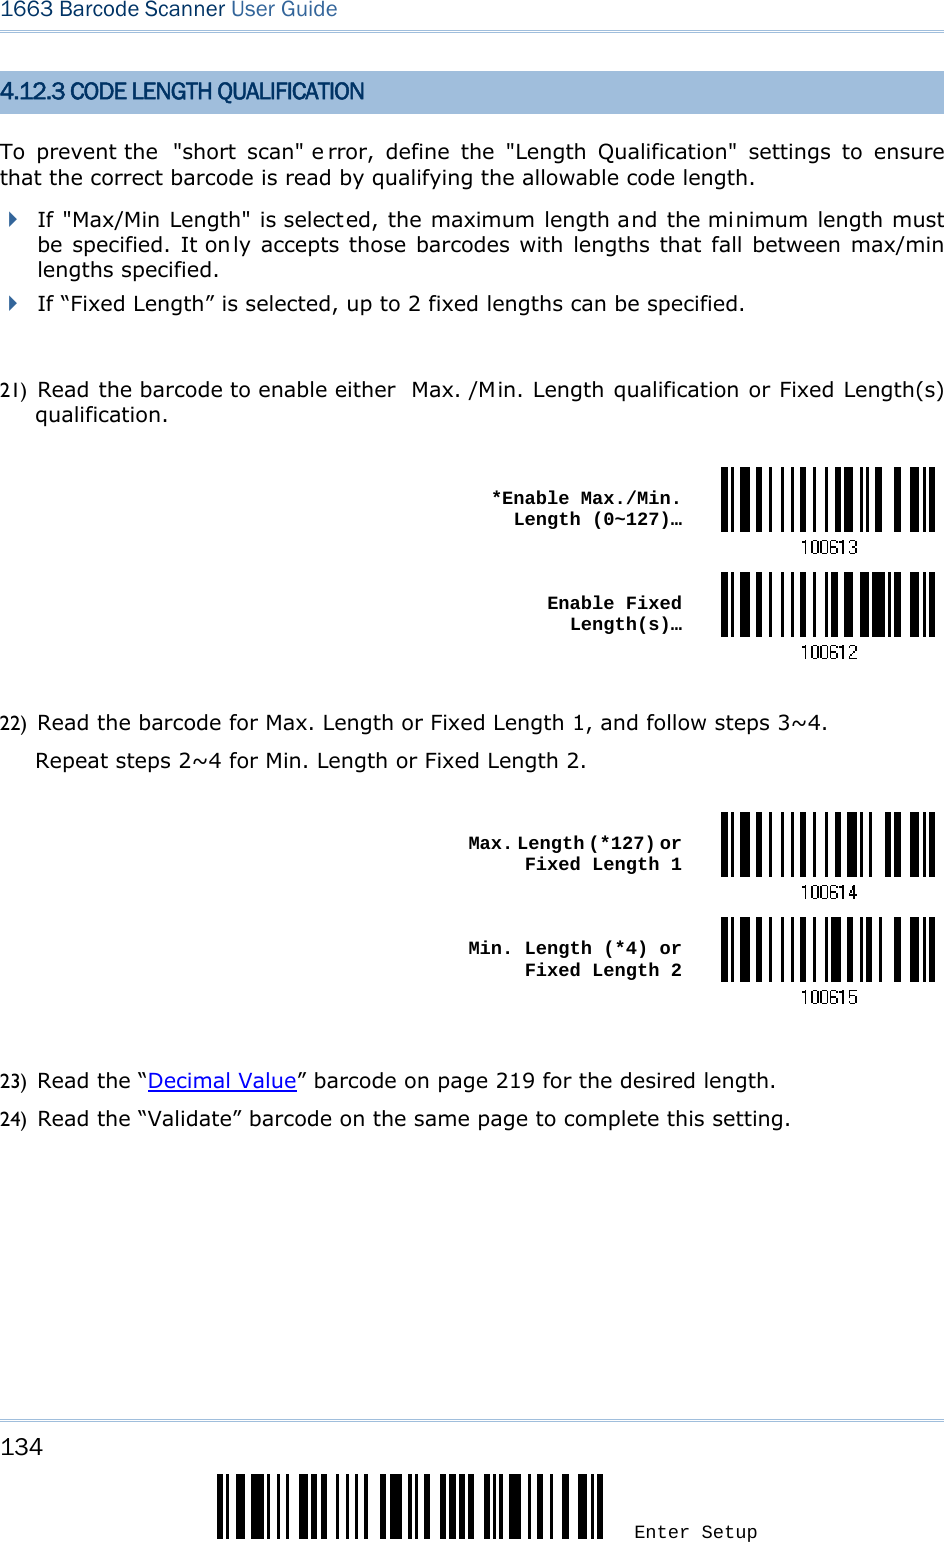 134 Enter Setup 1663 Barcode Scanner User Guide  4.12.3 CODE LENGTH QUALIFICATION To prevent the  &quot;short scan&quot; e rror, define the &quot;Length Qualification&quot; settings to ensure that the correct barcode is read by qualifying the allowable code length.    If &quot;Max/Min Length&quot; is selected, the maximum length and the minimum length must be specified. It on ly accepts those barcodes with lengths that fall between max/min lengths specified.  If “Fixed Length” is selected, up to 2 fixed lengths can be specified.  21) Read the barcode to enable either  Max. /Min. Length qualification or Fixed Length(s) qualification.   *Enable Max./Min. Length (0~127)… Enable Fixed Length(s)… 22) Read the barcode for Max. Length or Fixed Length 1, and follow steps 3~4. Repeat steps 2~4 for Min. Length or Fixed Length 2.   Max. Length (*127) or Fixed Length 1 Min. Length (*4) or Fixed Length 2 23) Read the “Decimal Value” barcode on page 219 for the desired length.   24) Read the “Validate” barcode on the same page to complete this setting. 